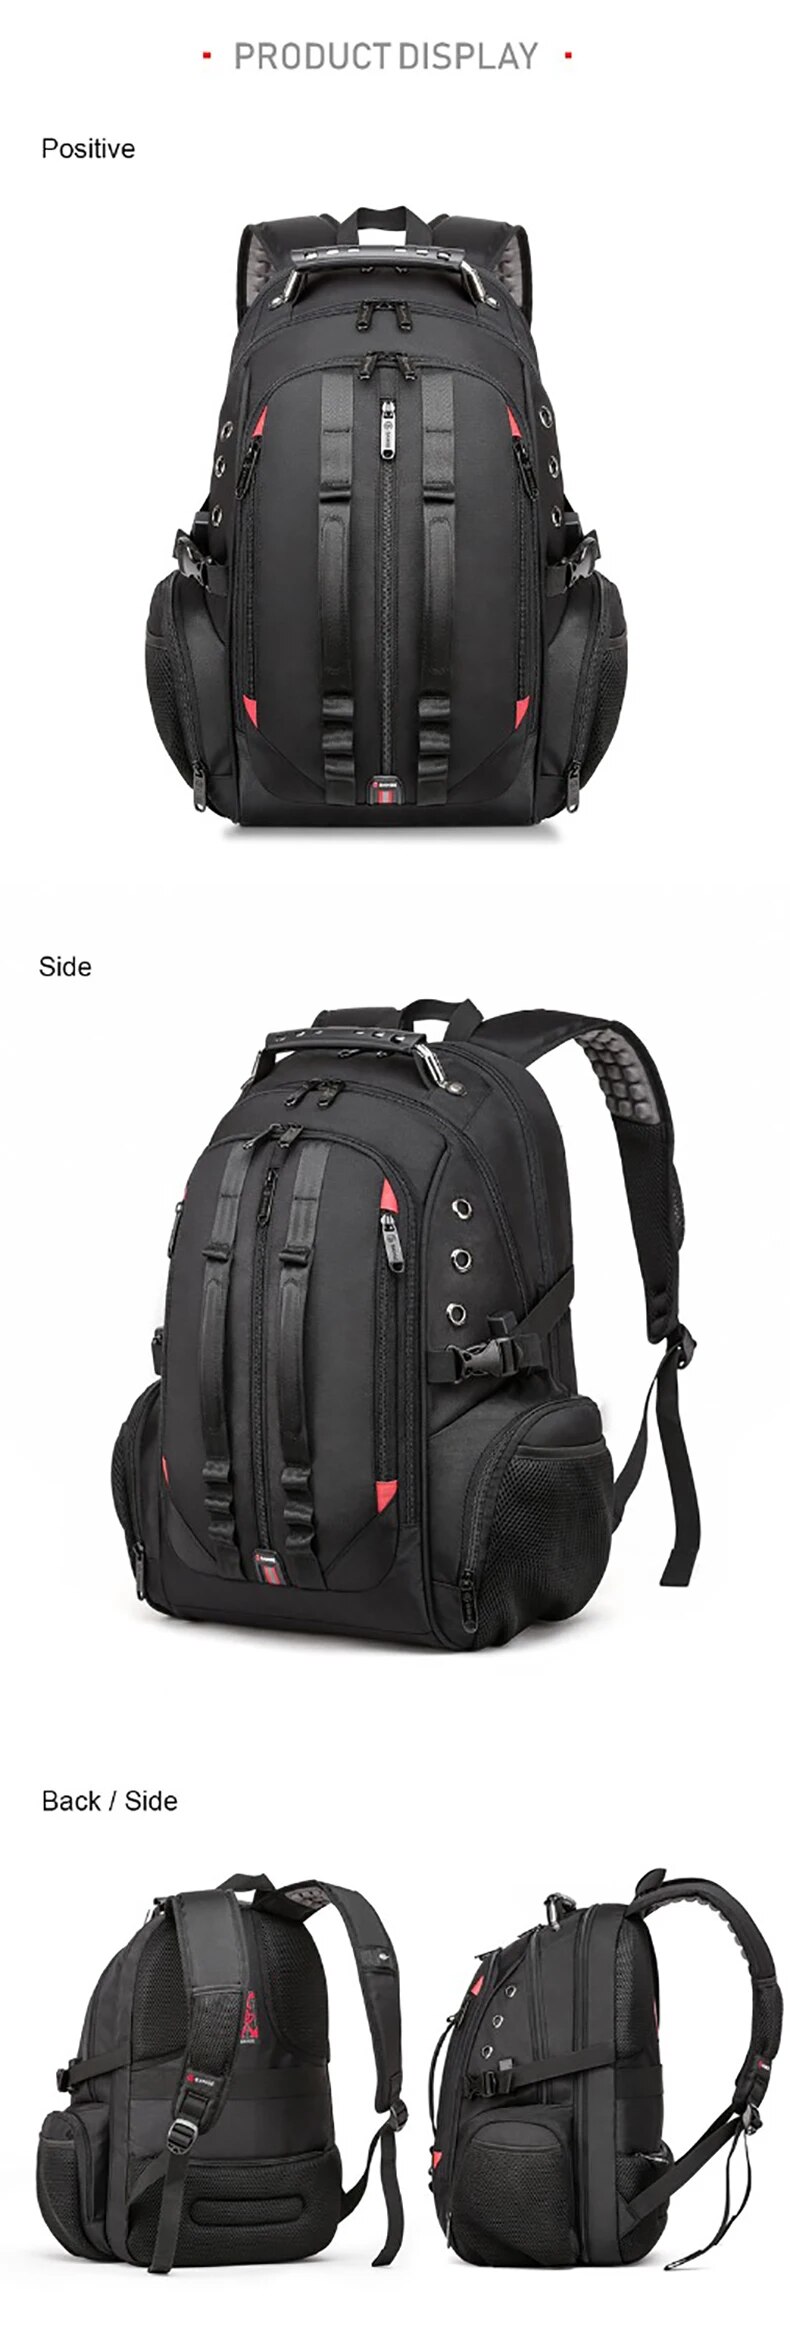 come4buy.com-Men's Large Capacity Waterproof Travel Backpack for Outdoor Camping & Hiking